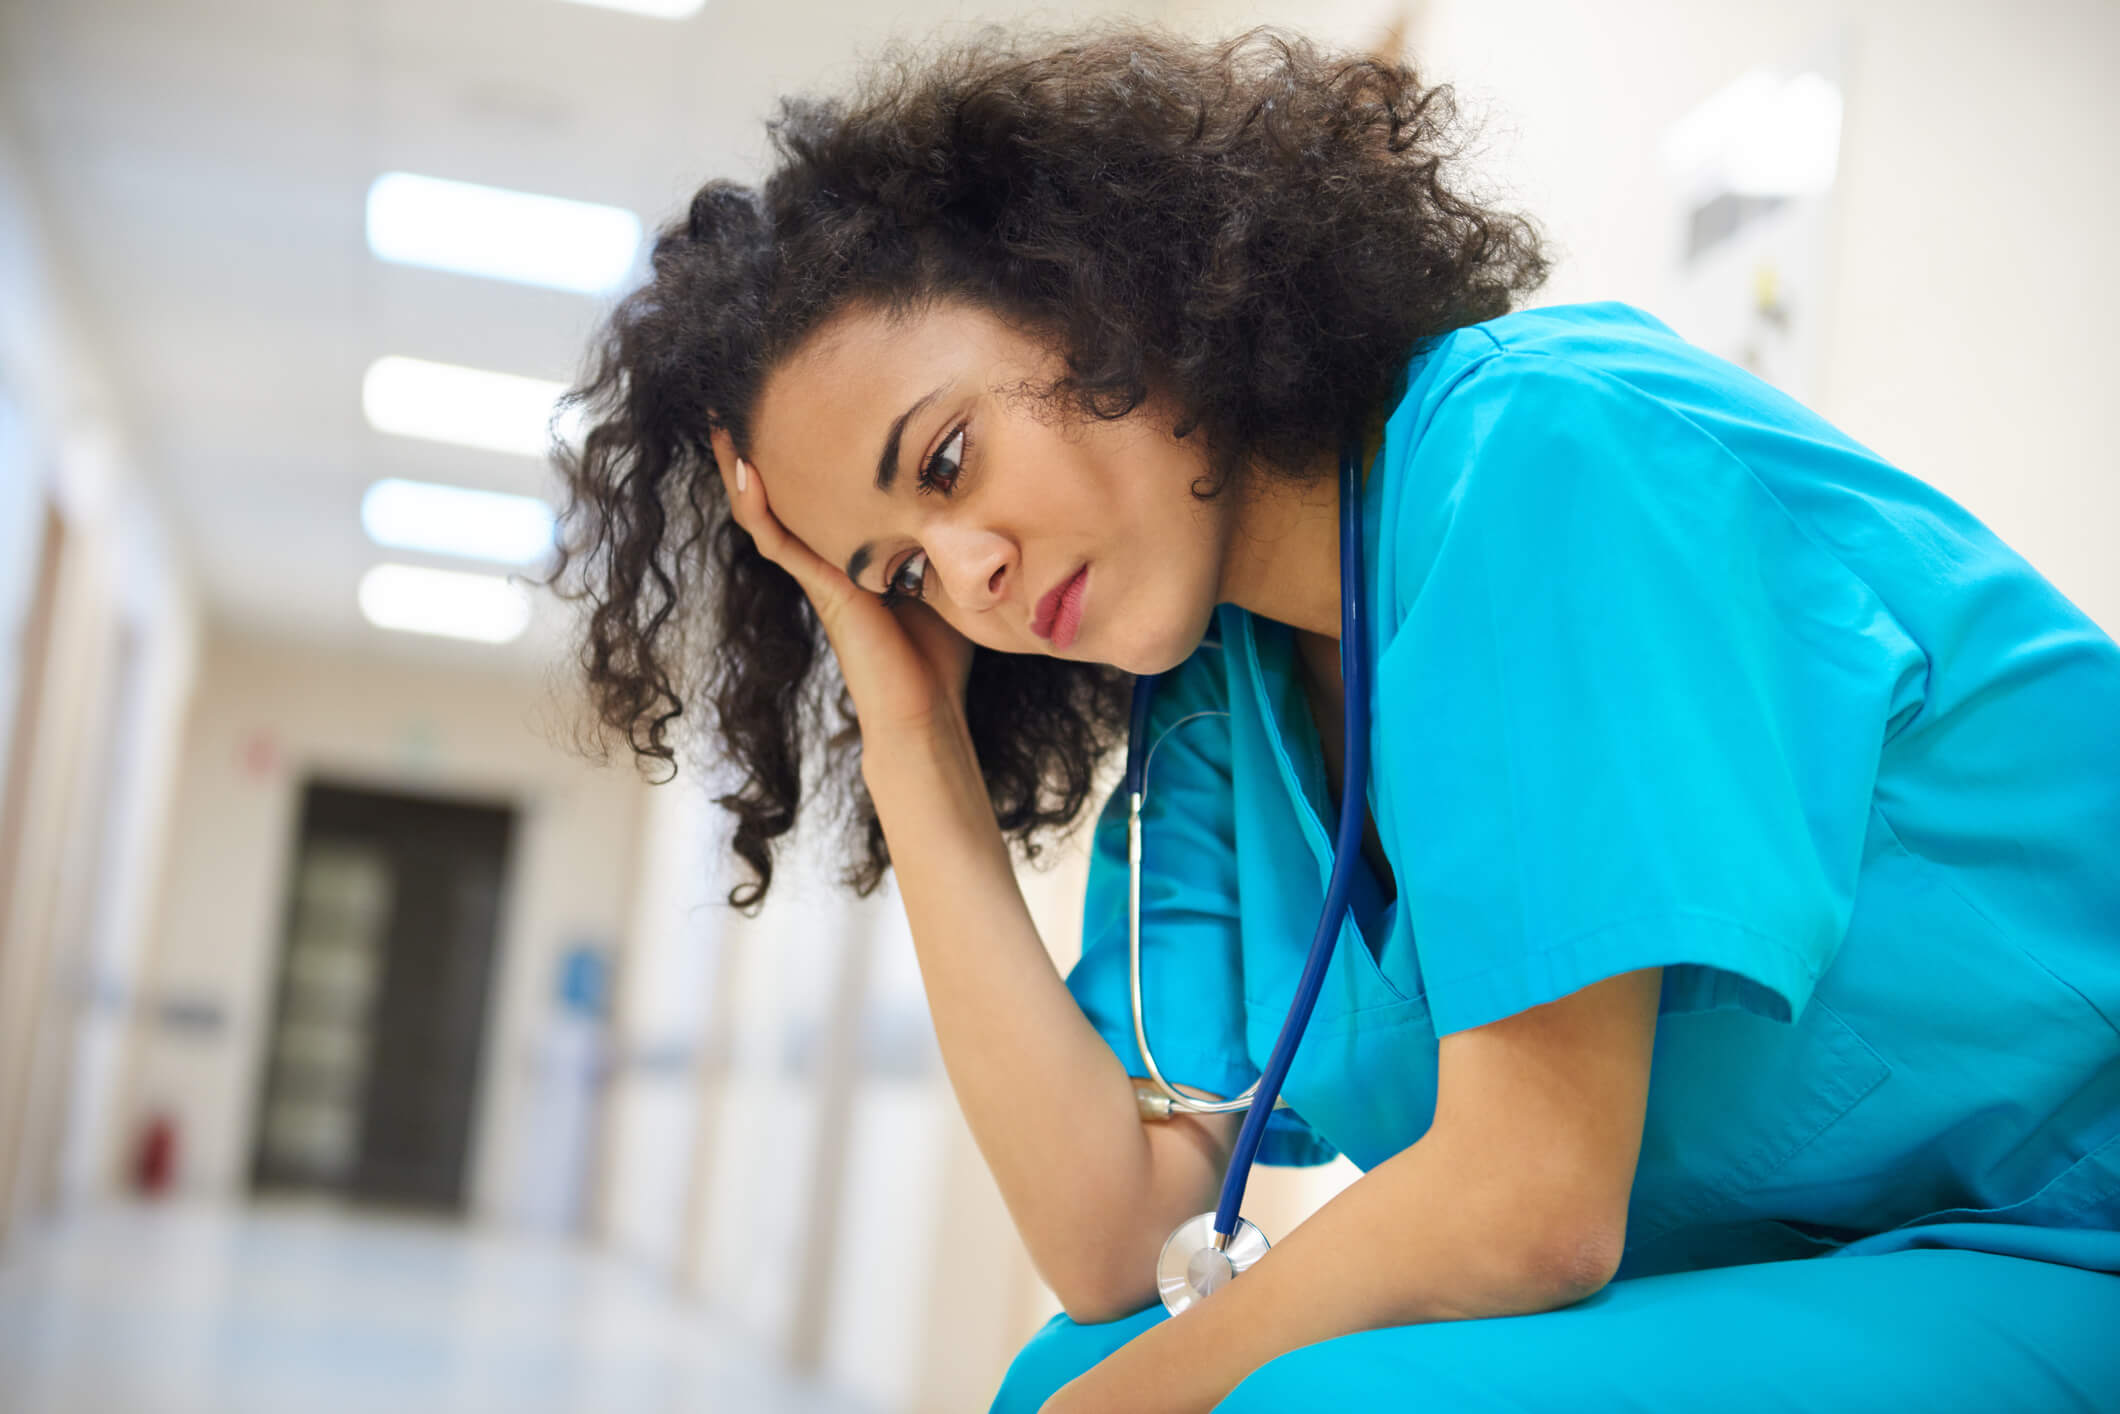 COVID-19 Is Exacerbating Physician Retention and Burnout. Here Are Some Tips to Address It